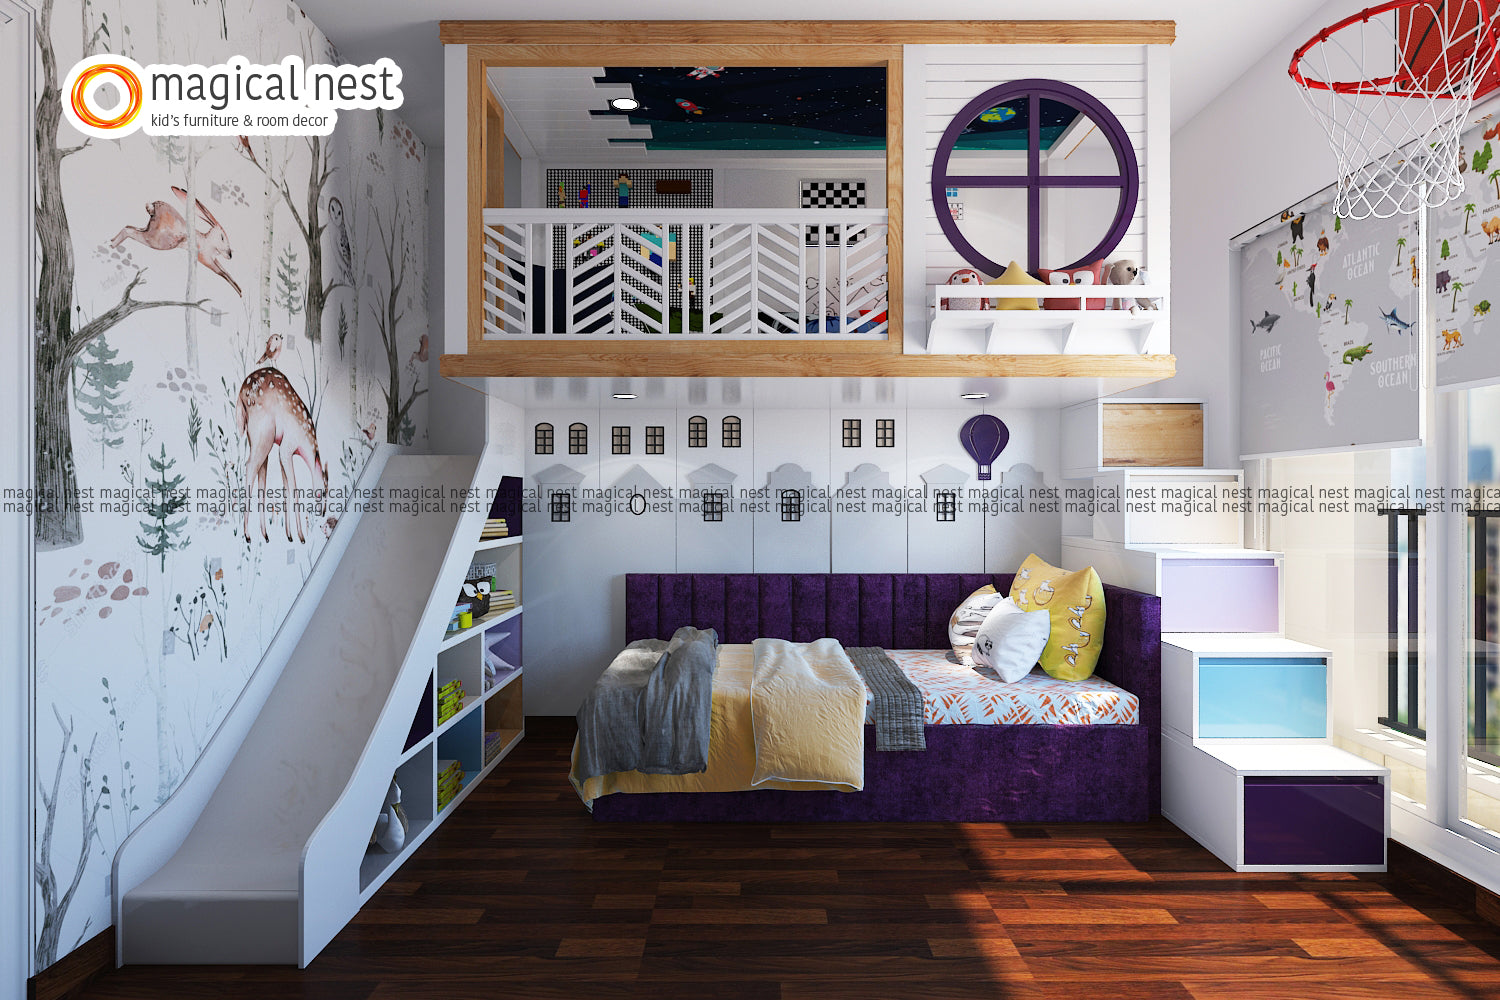 Purple theme kid’s room interior for the boy, with loft area sided by stairs and slide for play, a basketball board, and a study table.